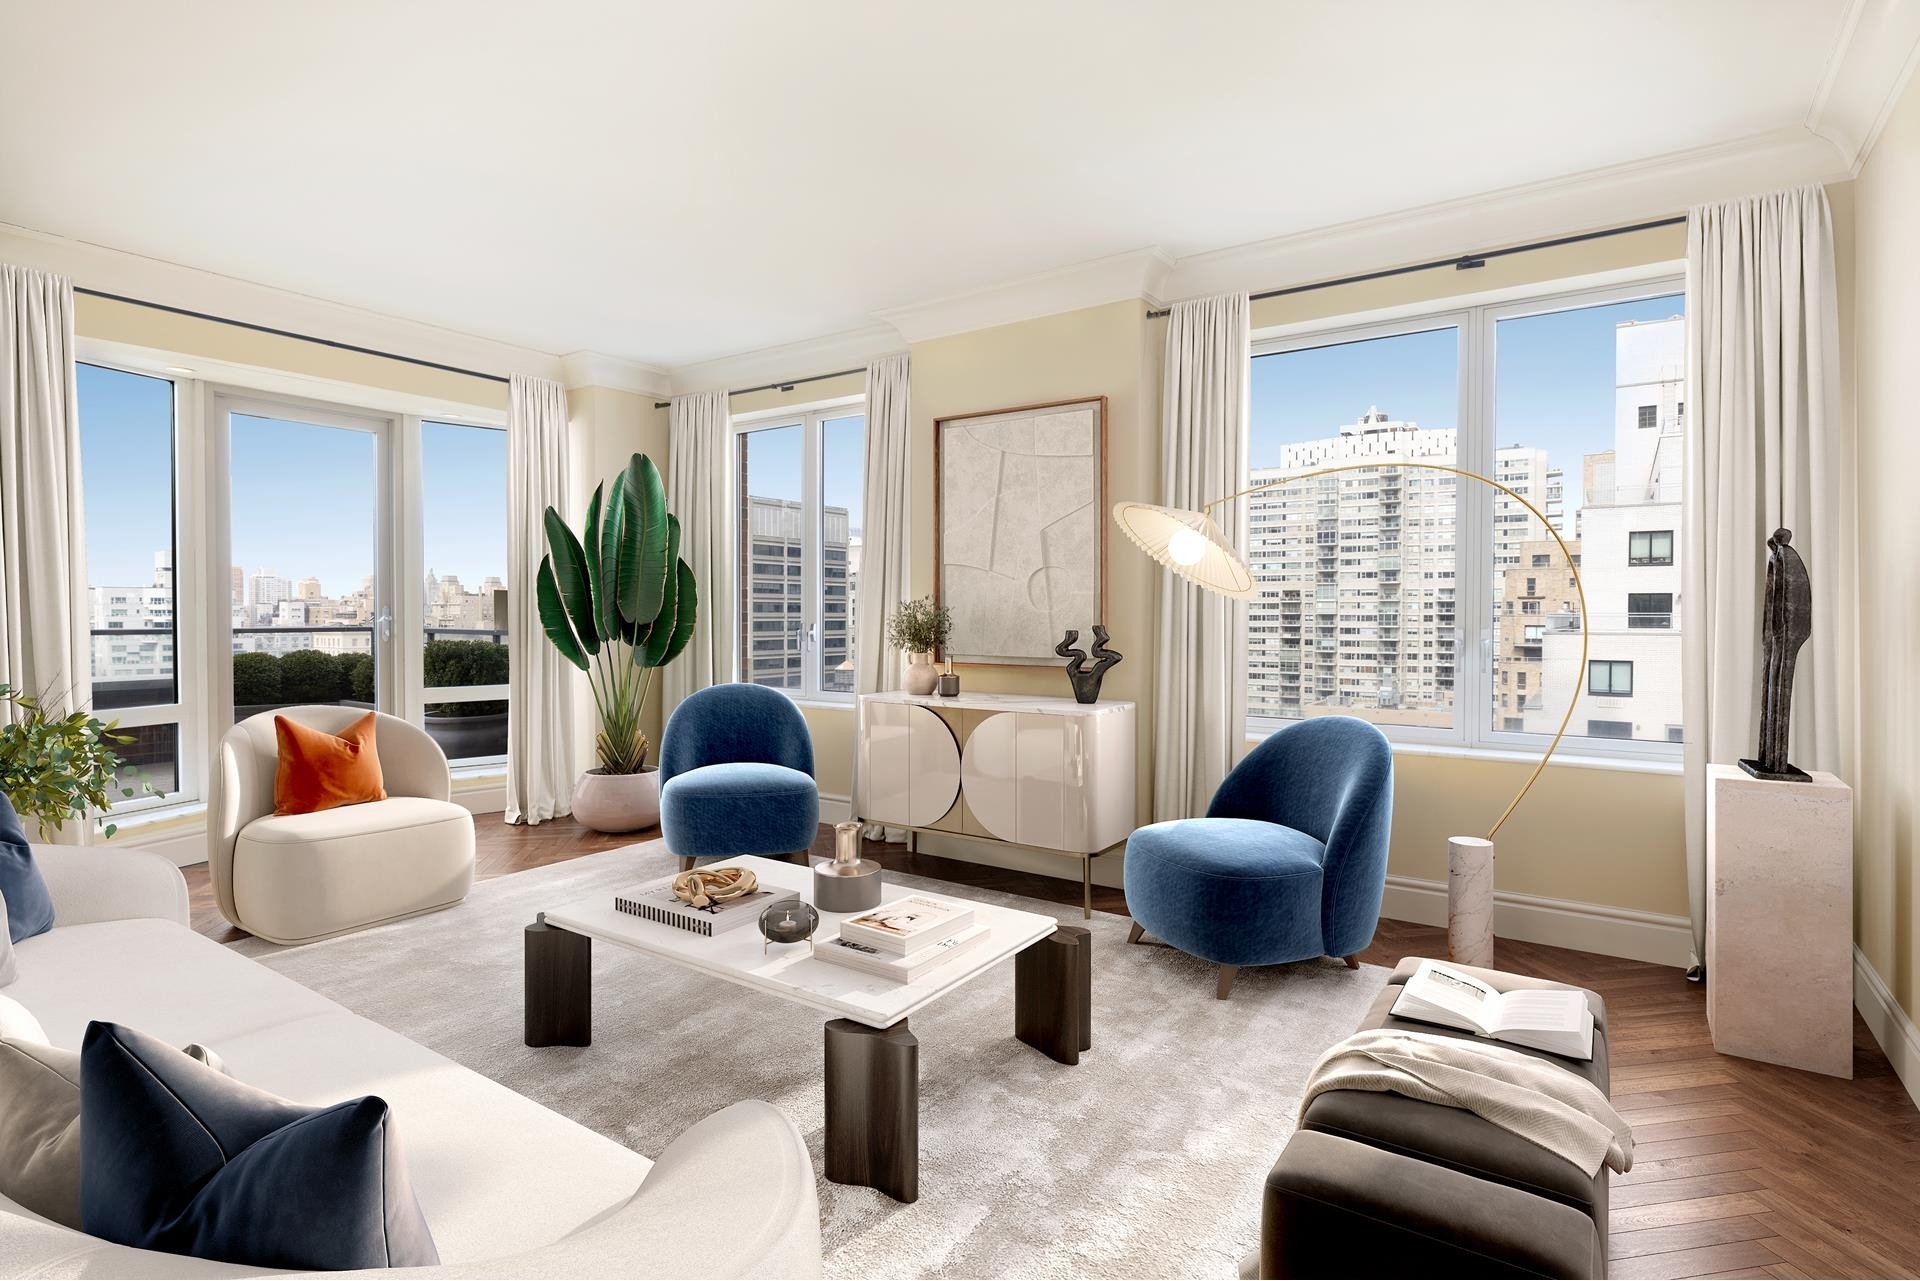 3. Condominiums for Sale at The Chatham, 181 E 65TH ST, 18B Lenox Hill, New York, New York 10065